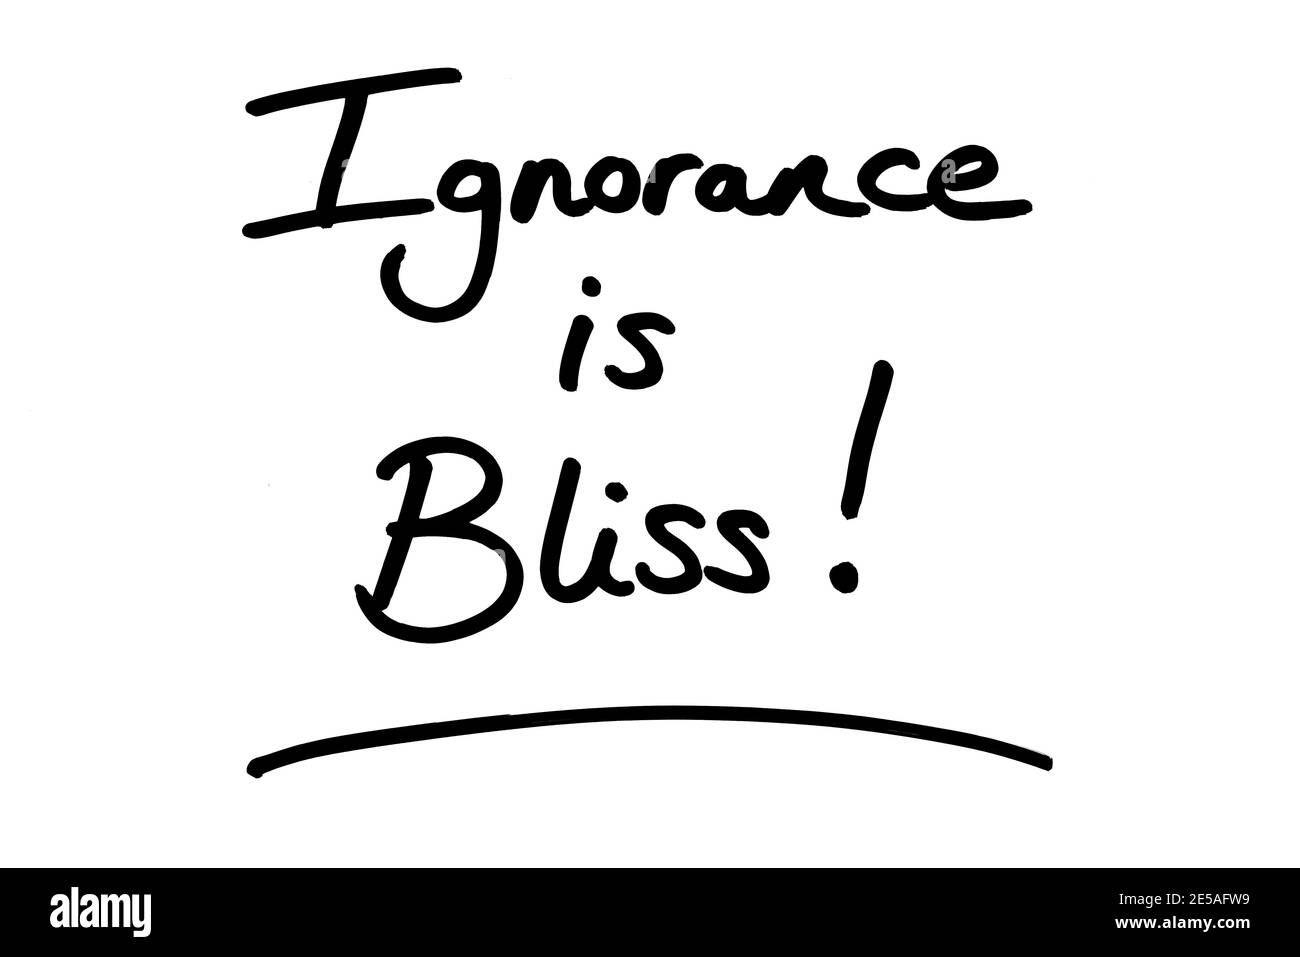 Ignorance is Bliss! handwritten on a white background. Stock Photo